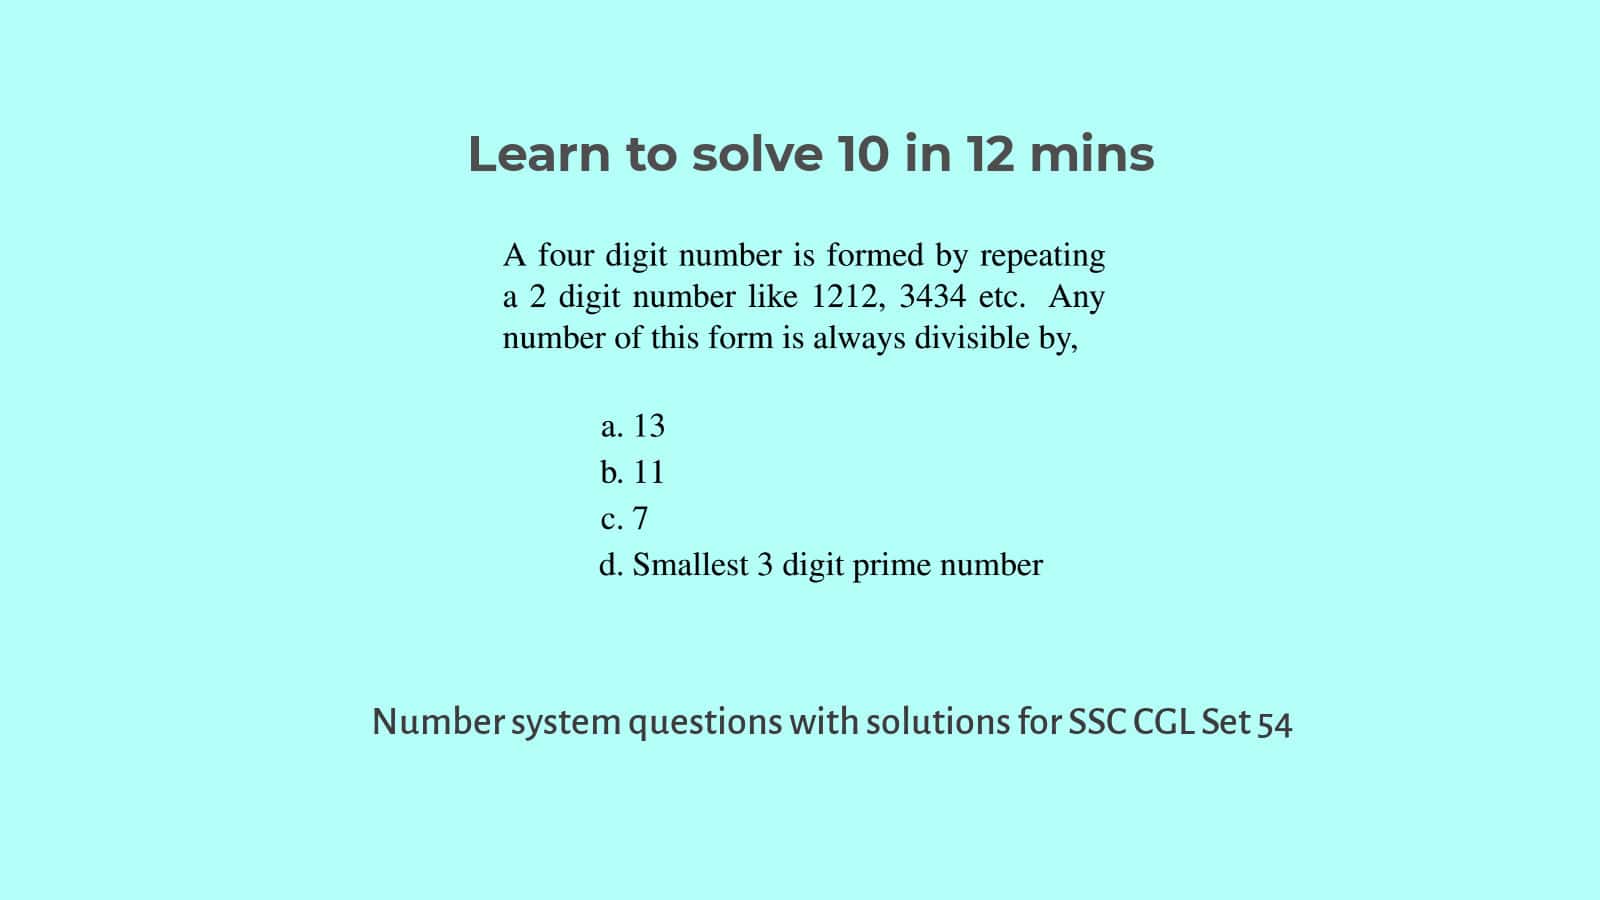 How to Solve Number System Questions: SSC CGL Set 54